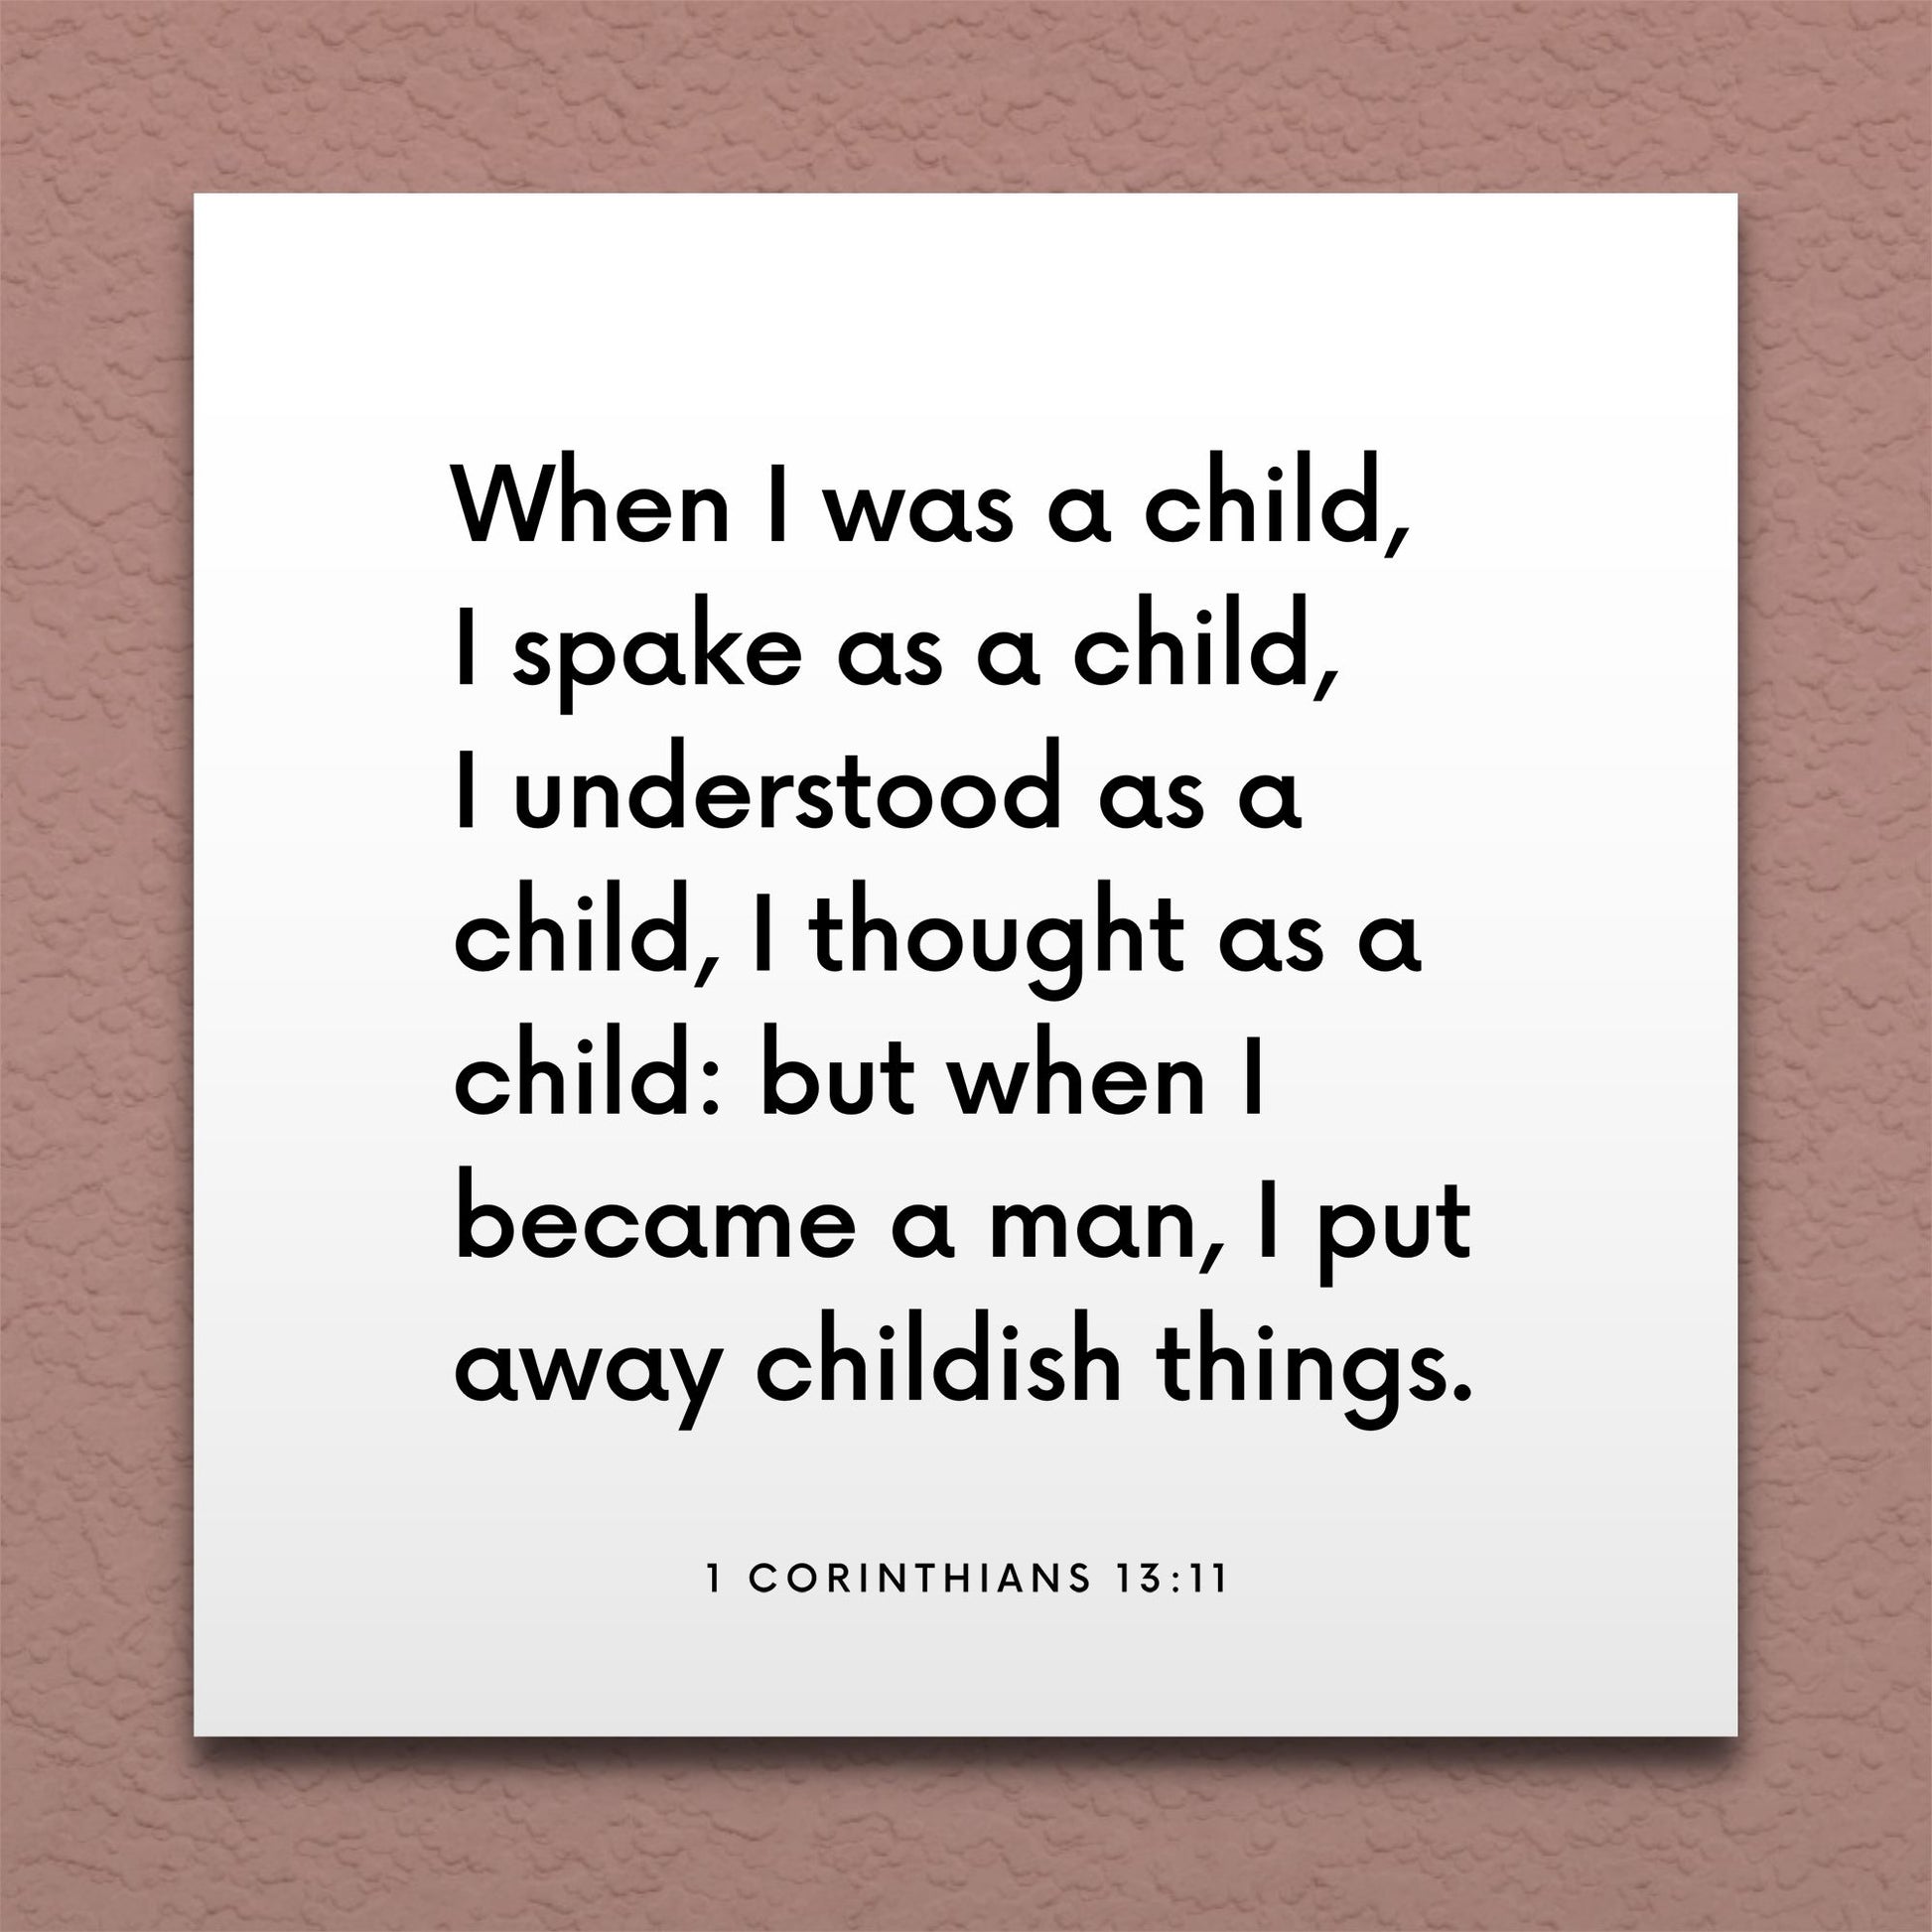 Wall-mounted scripture tile for 1 Corinthians 13:11 - "When I was a child, I spake as a child"